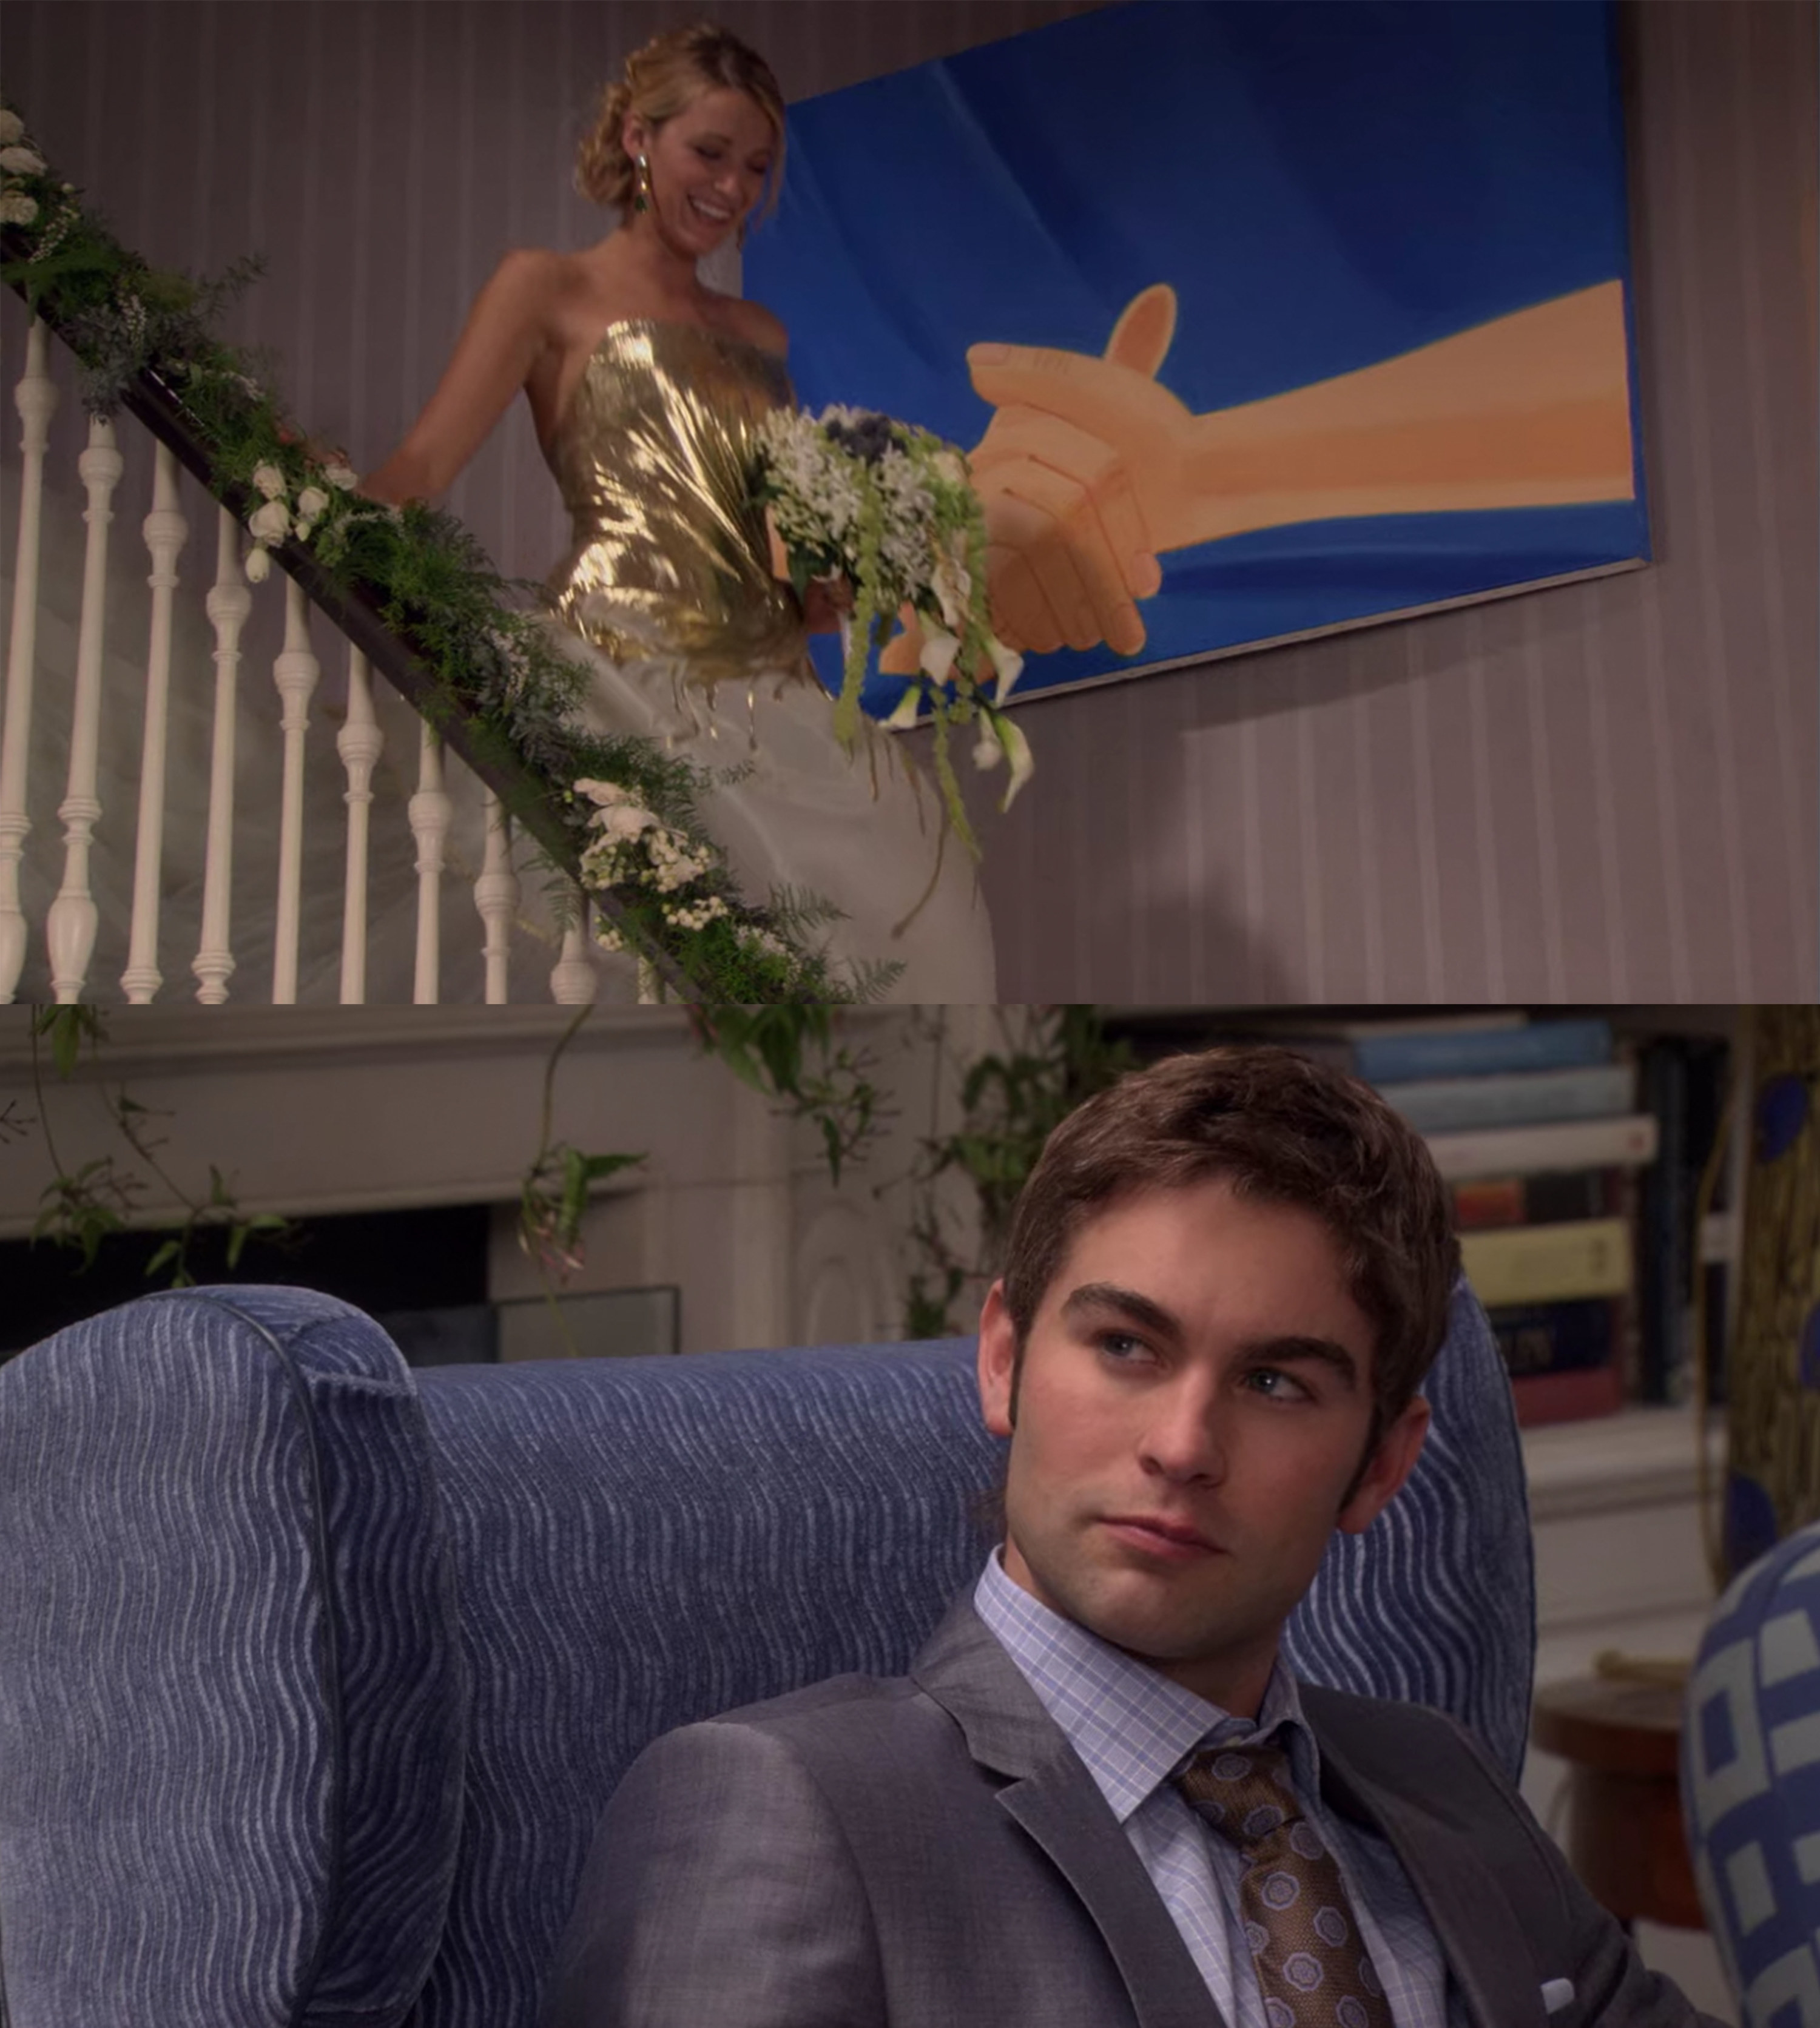 Nate looks at Serena longingly as she walks down the stairs